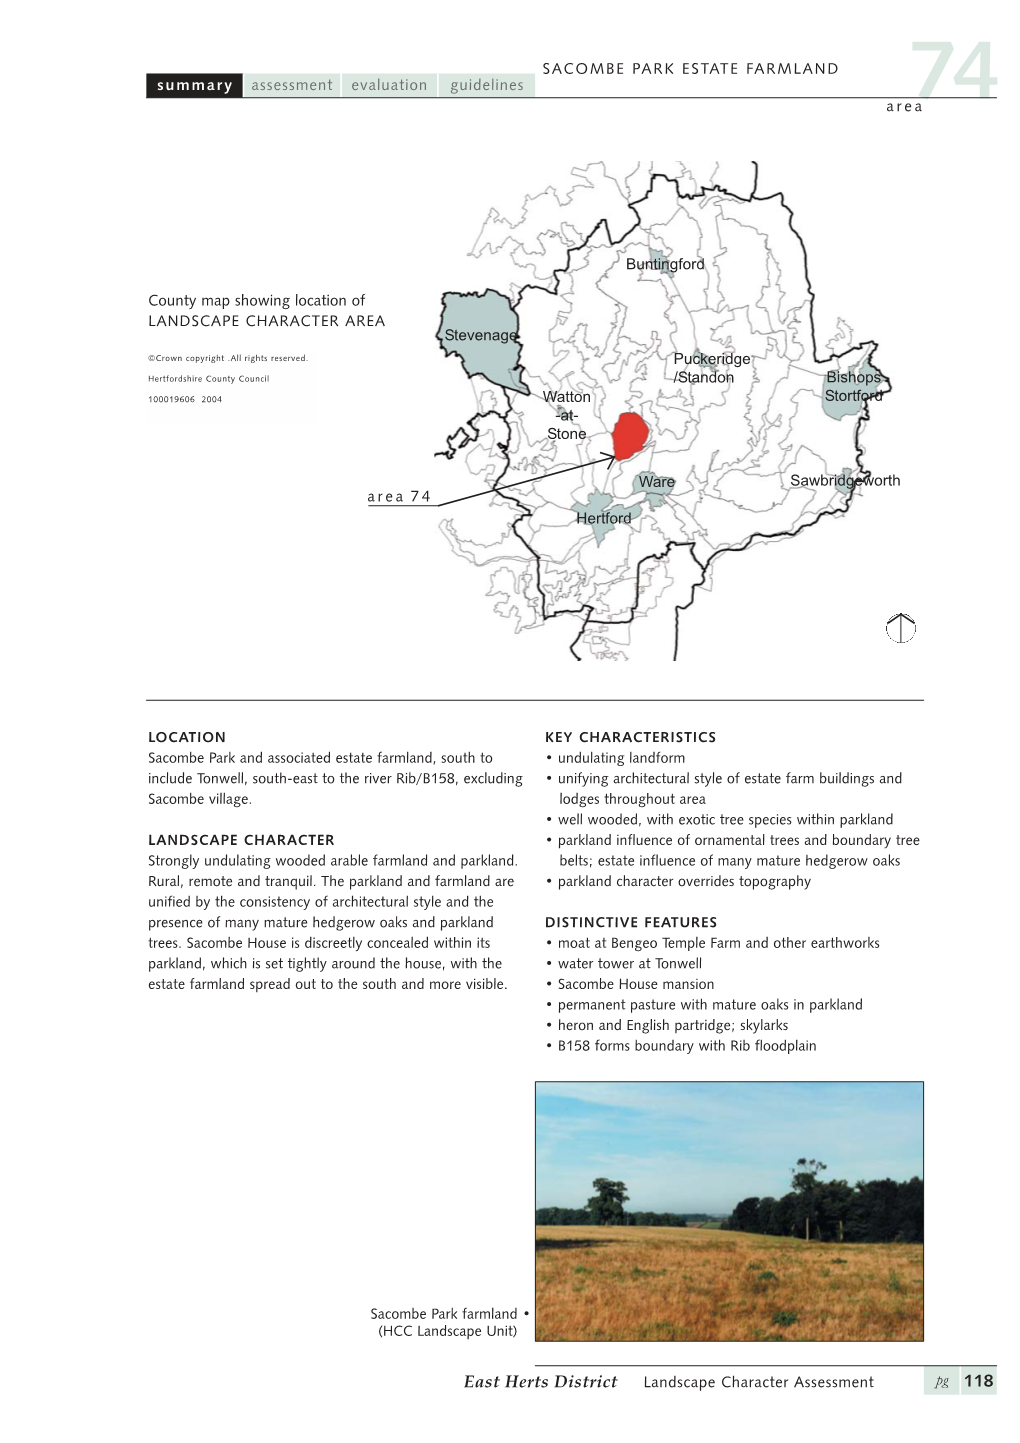 Area Summary Assessment Guidelines Evaluation SACOMBE PARK